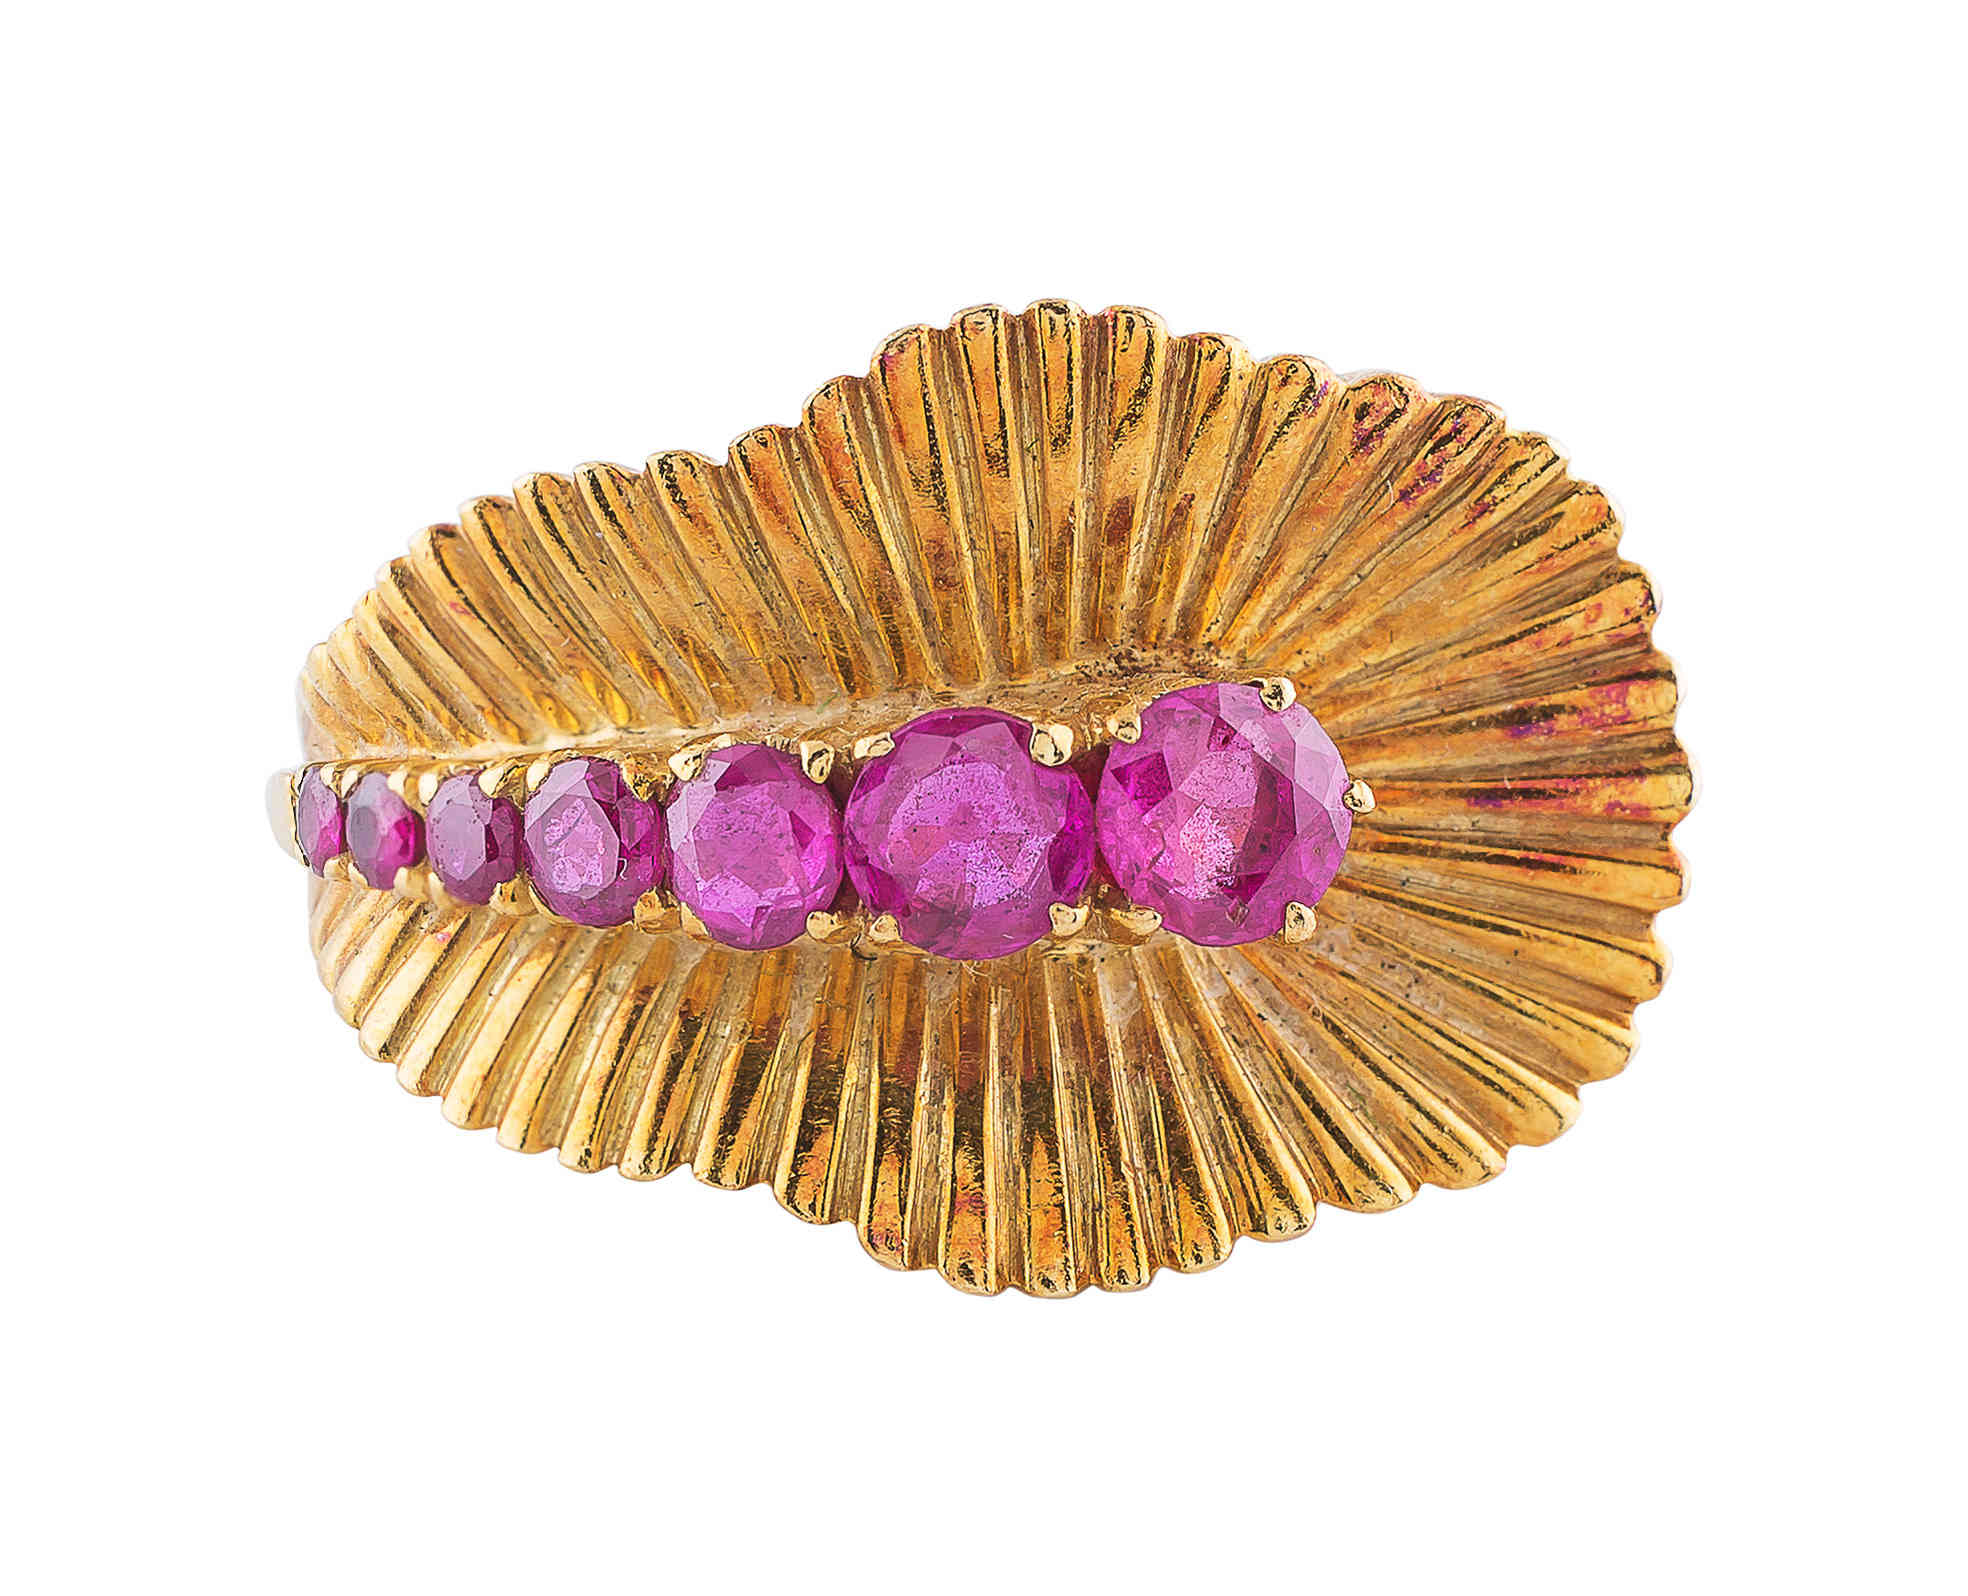 A ring with pink stones, possibly tourmaline, set in yellow gold